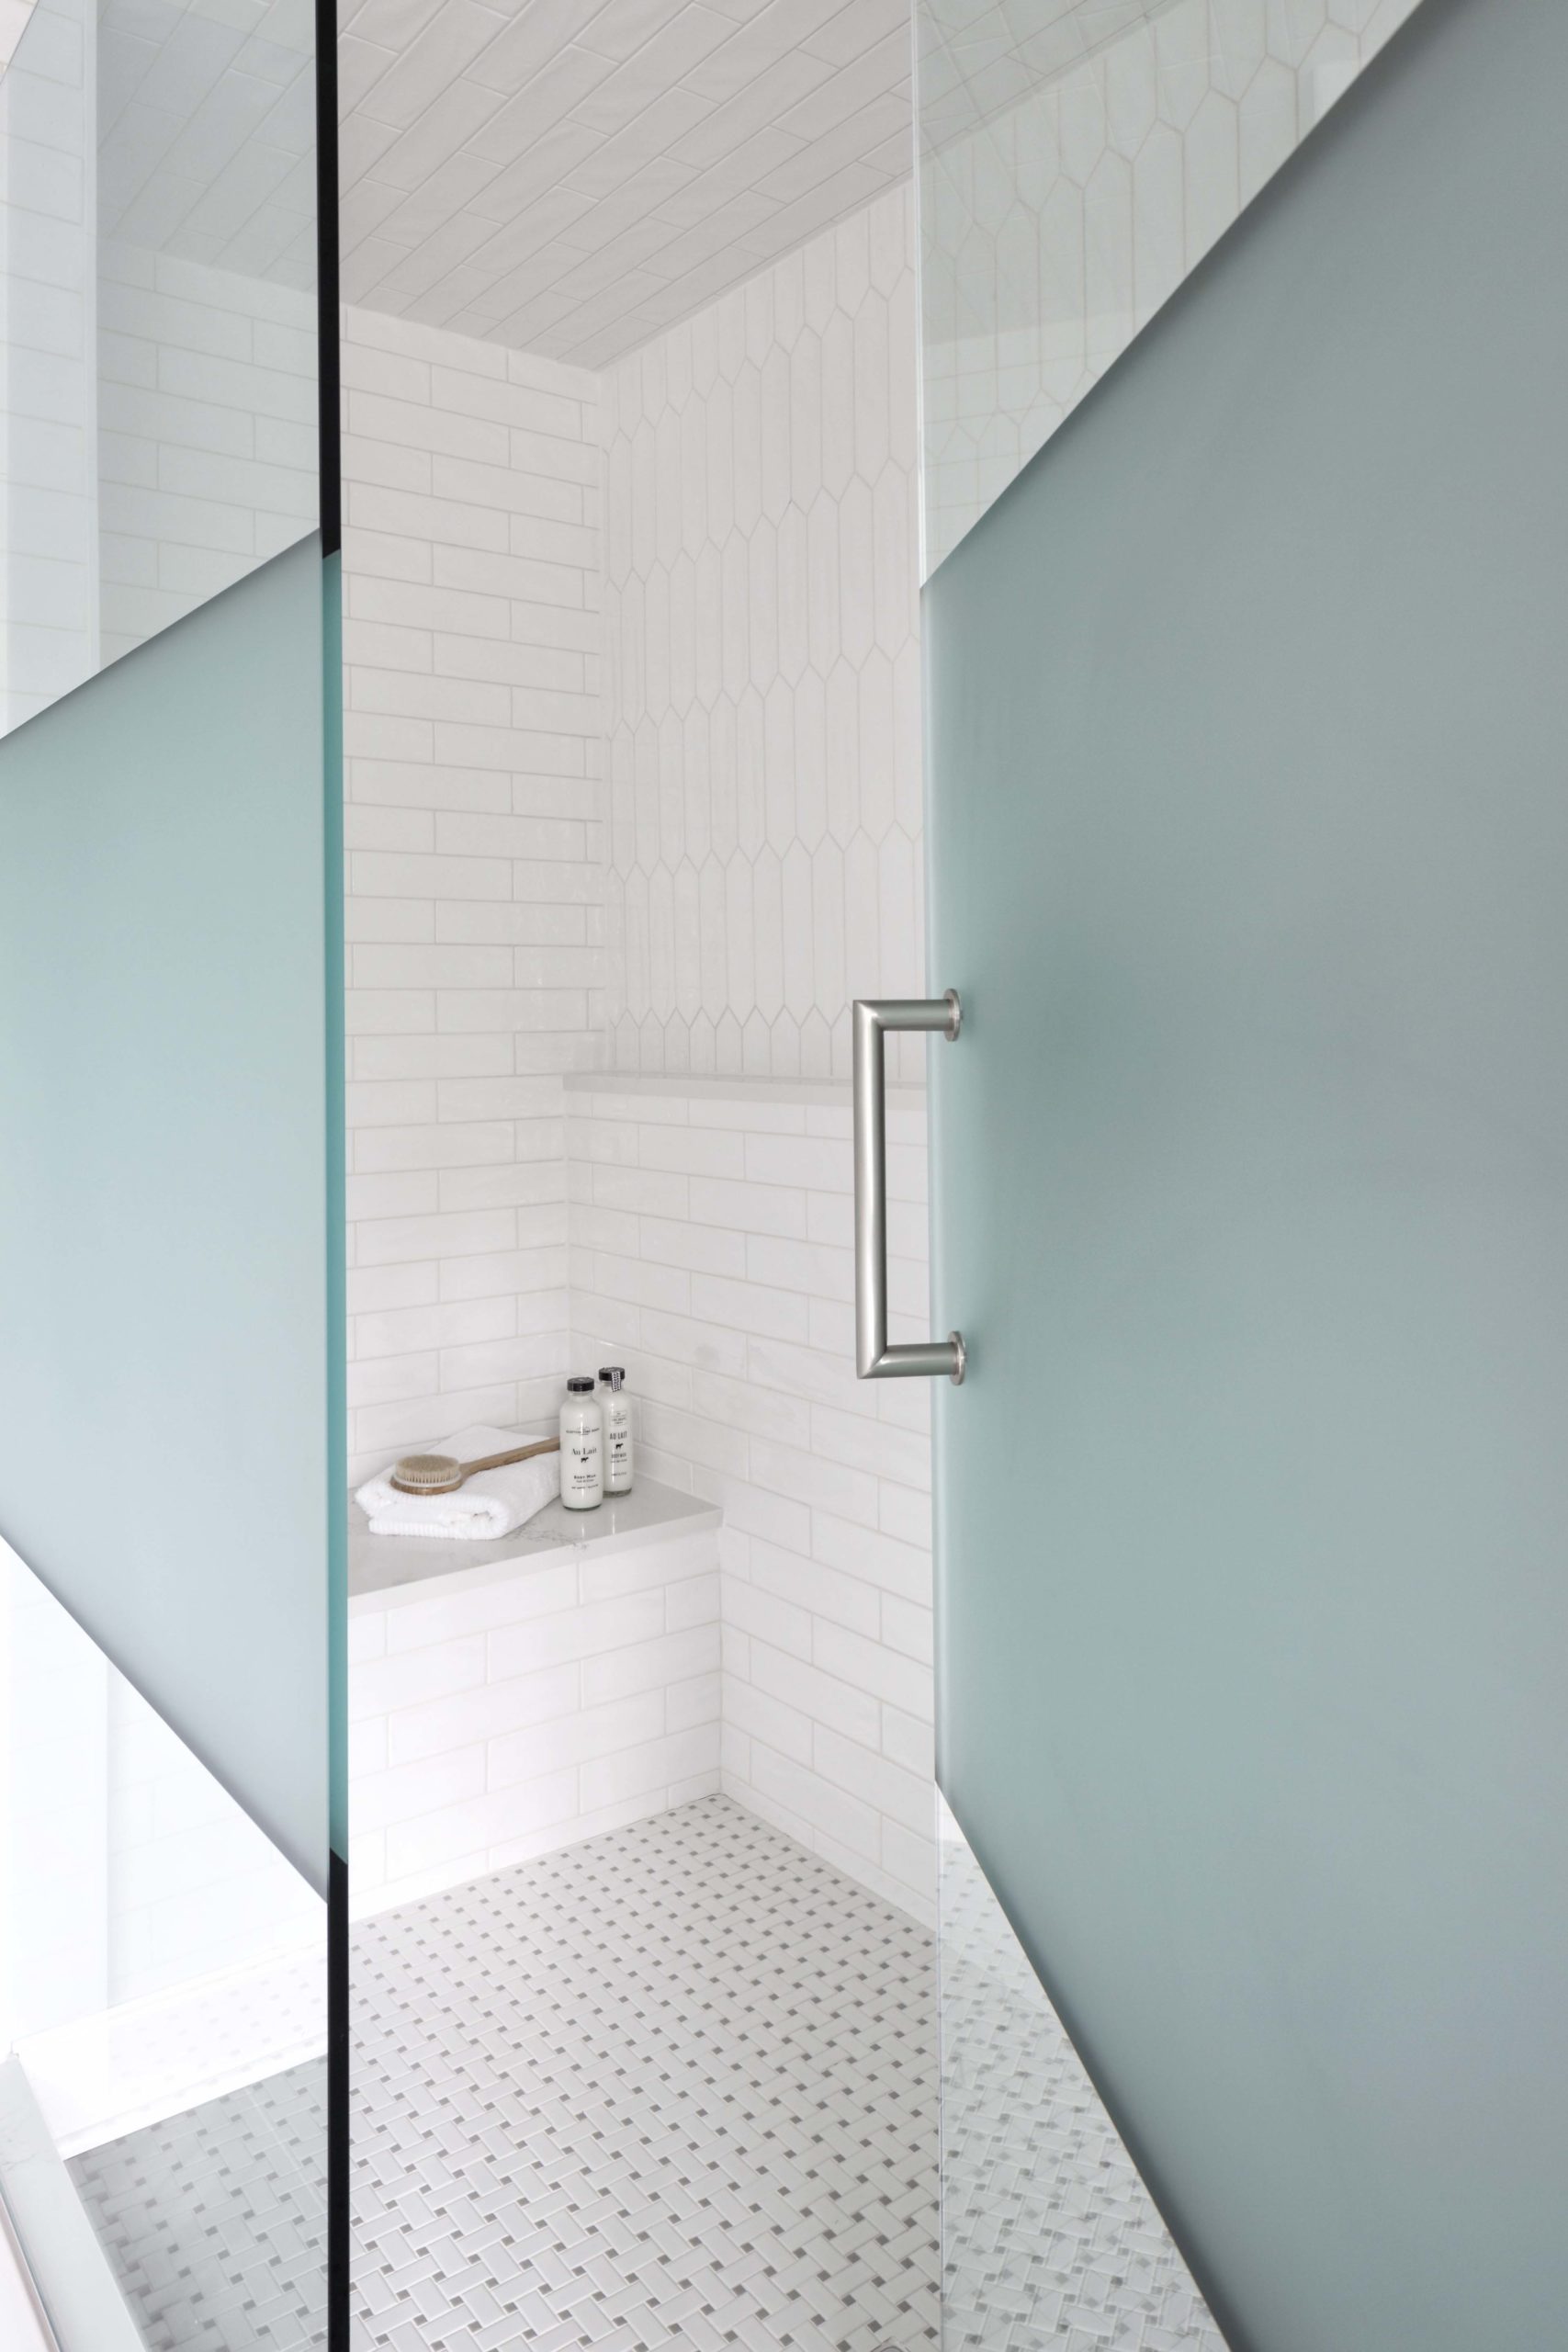 A white bathroom with a glass shower door.